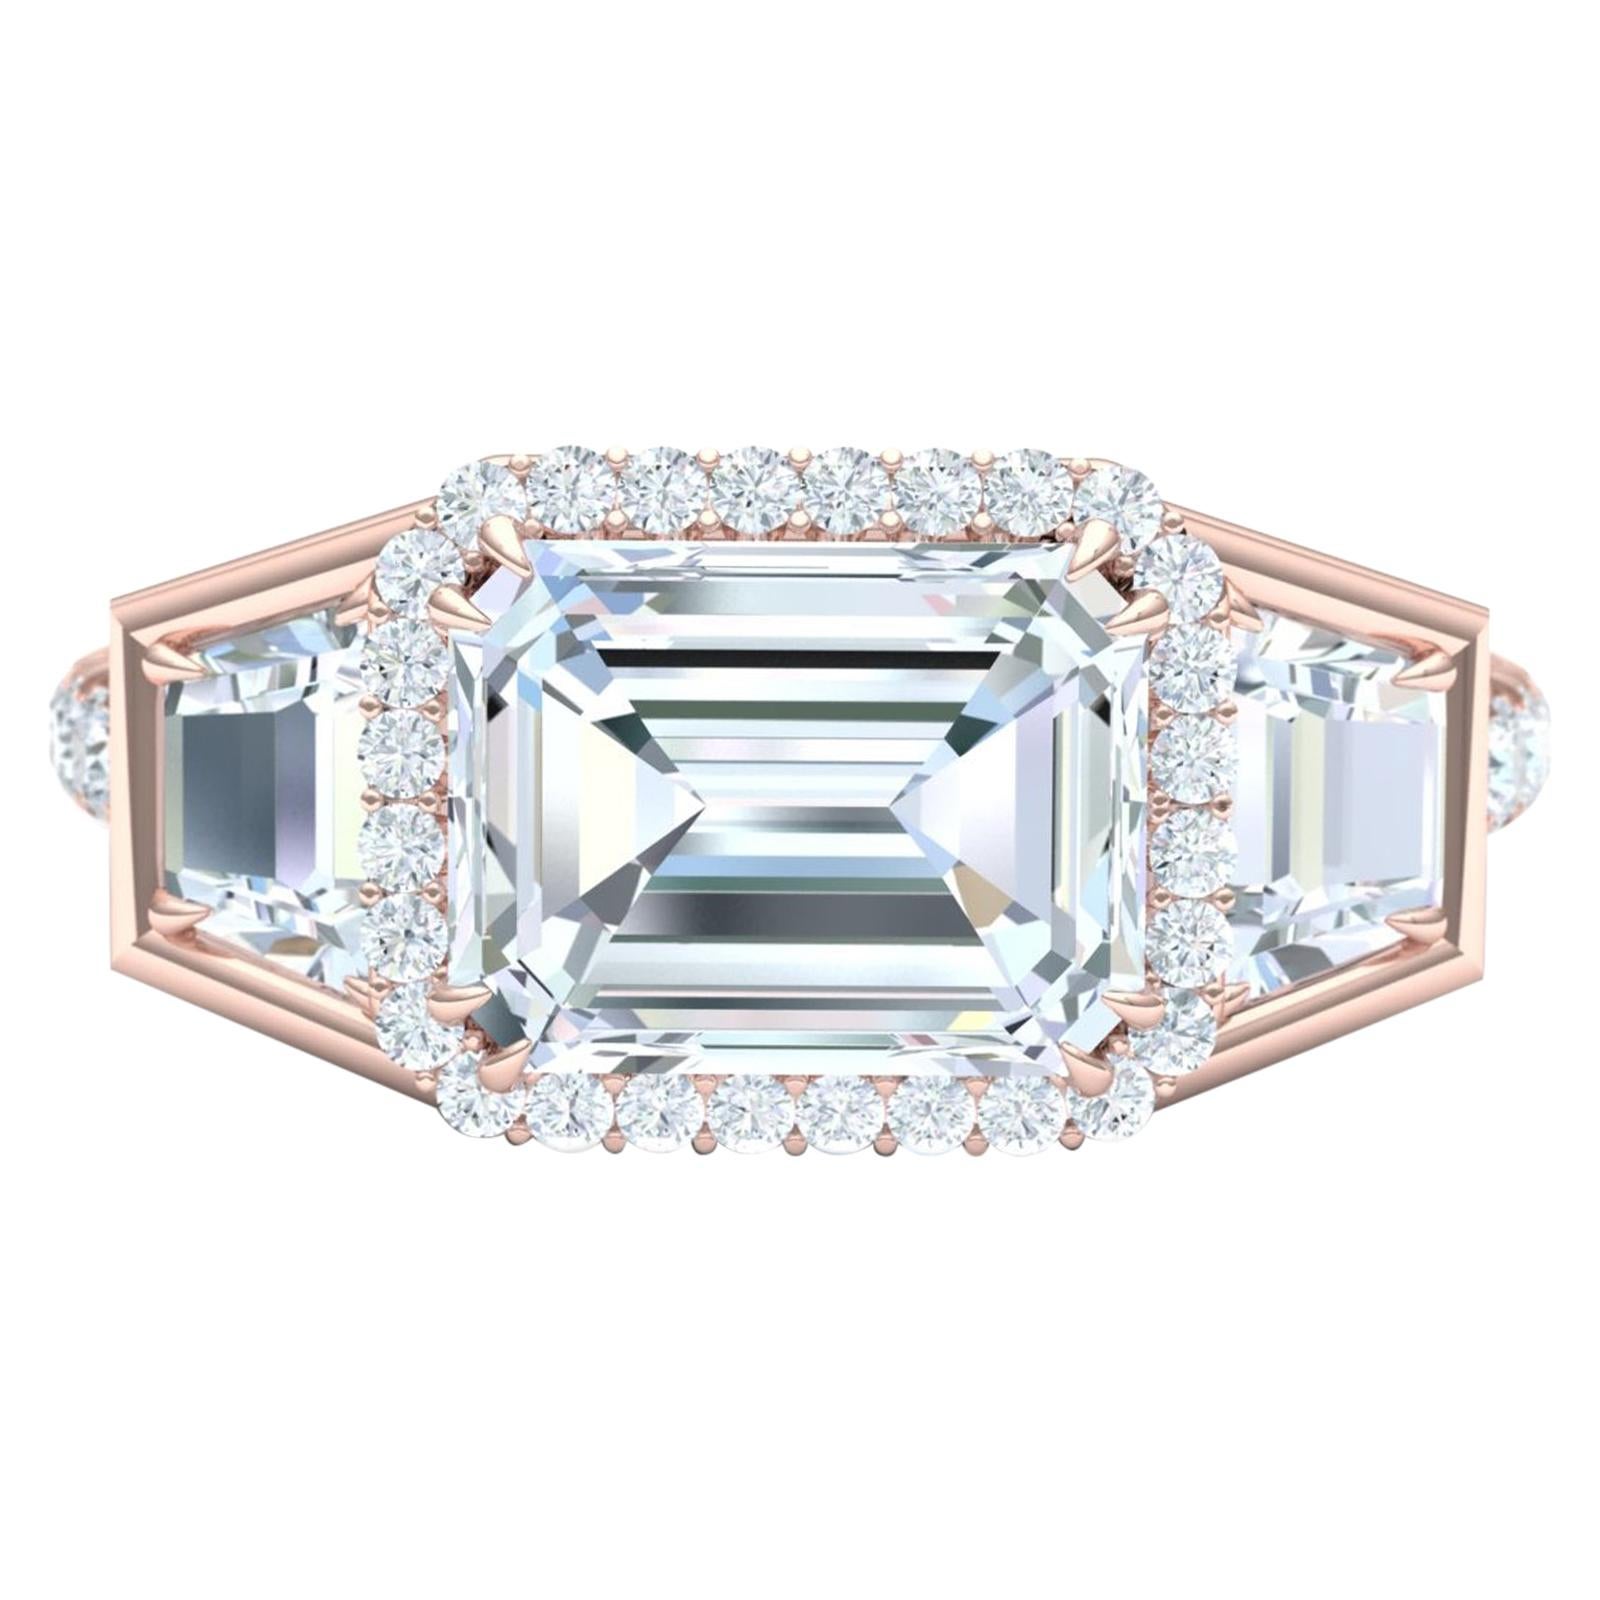 3 Carat Emerald Cut GIA Certified Diamond Engagement Rose Gold Ring For Sale